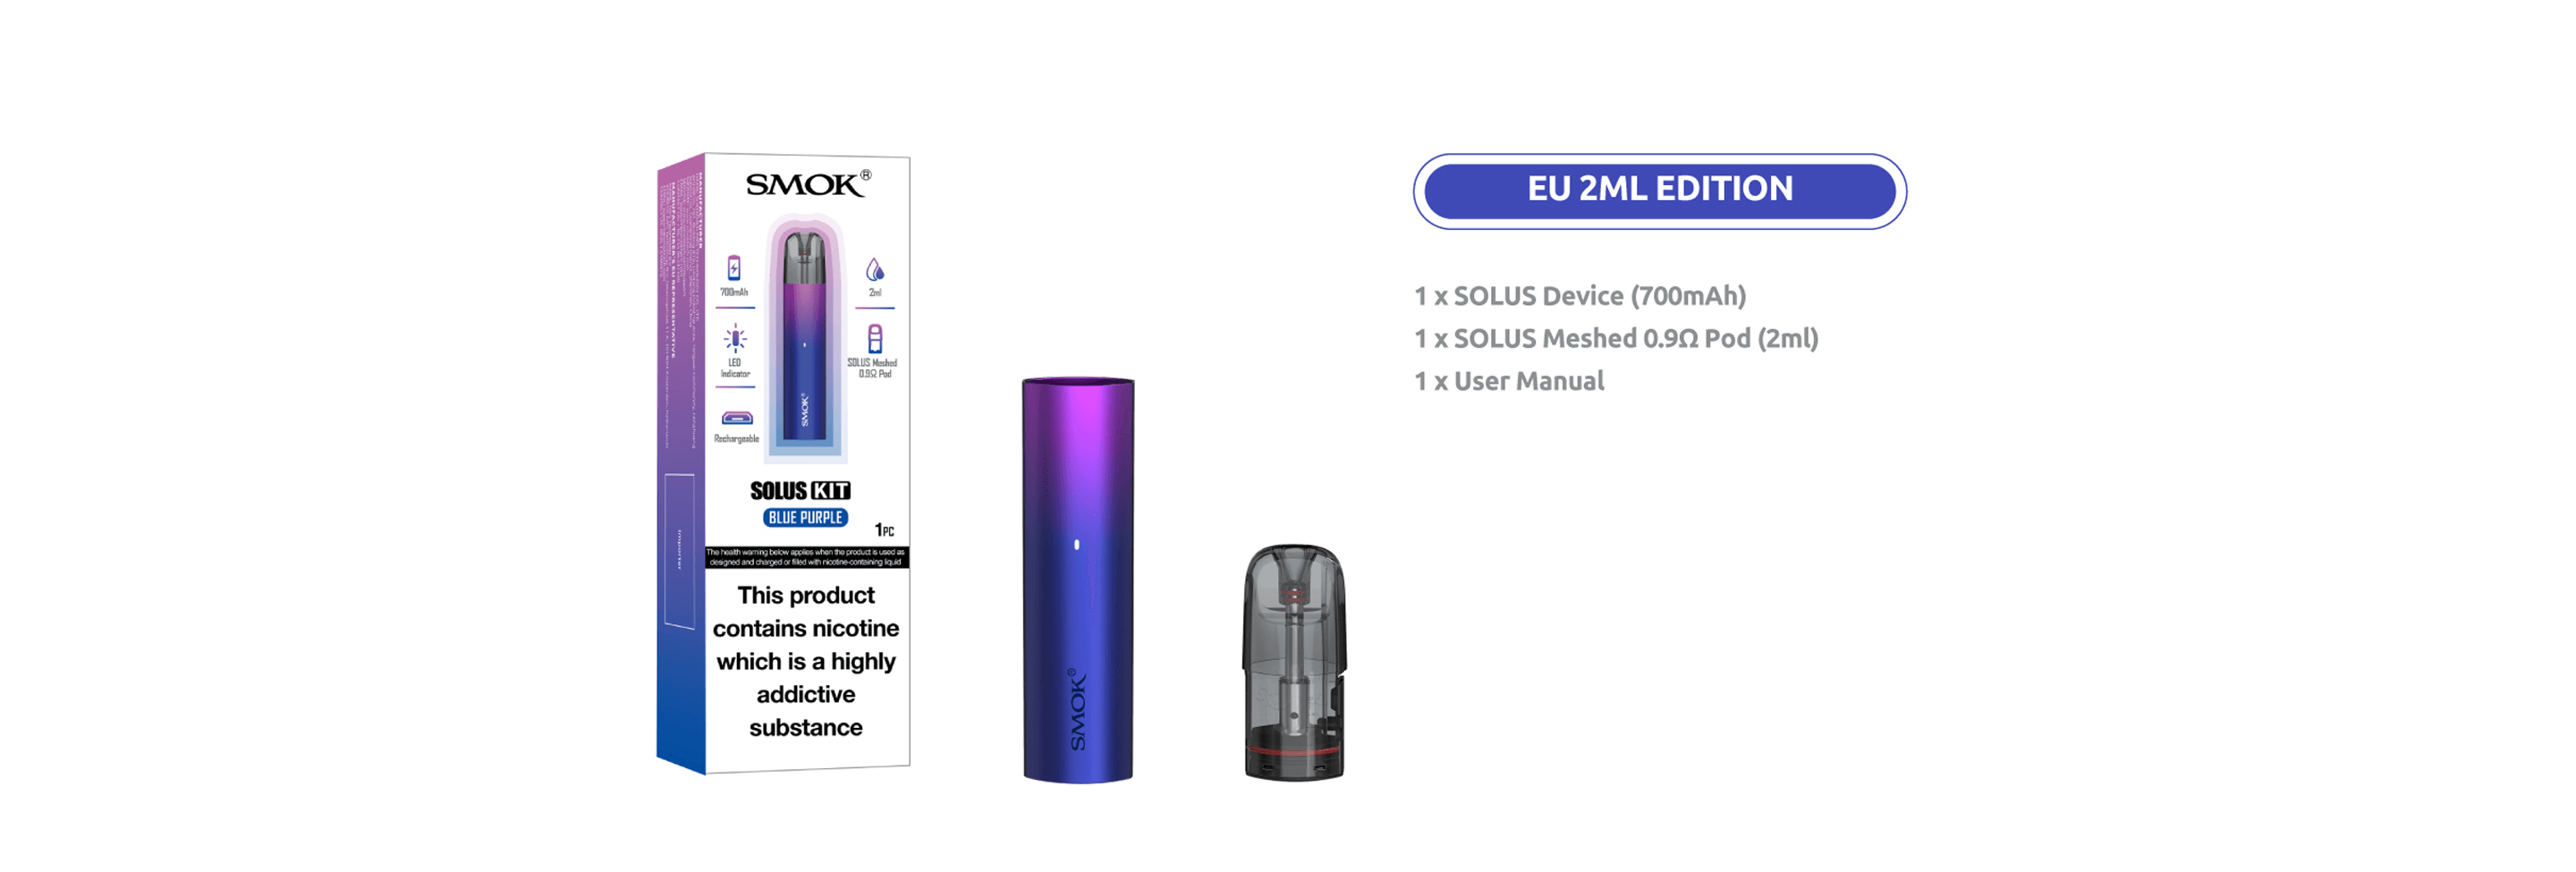 Smok Solus - what's in the box?